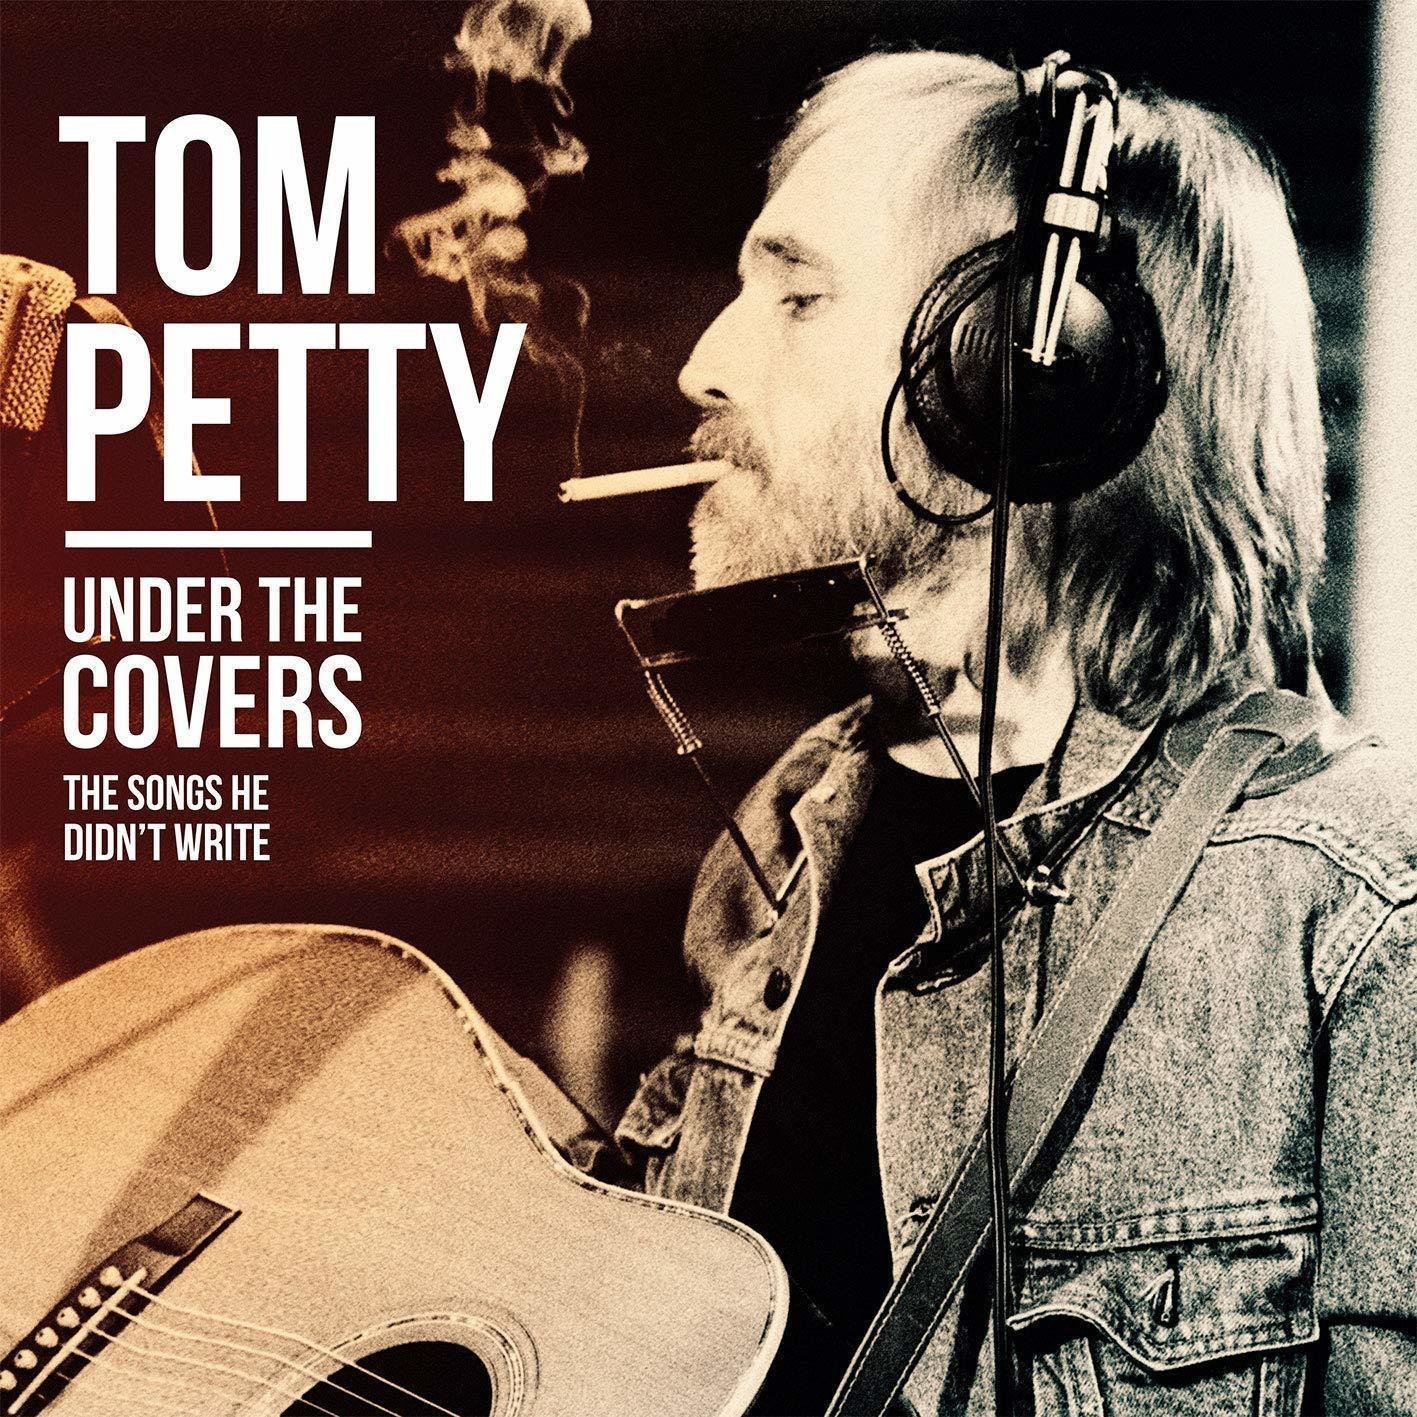 Vinyl Record Tom Petty - Under The Covers (2 LP)